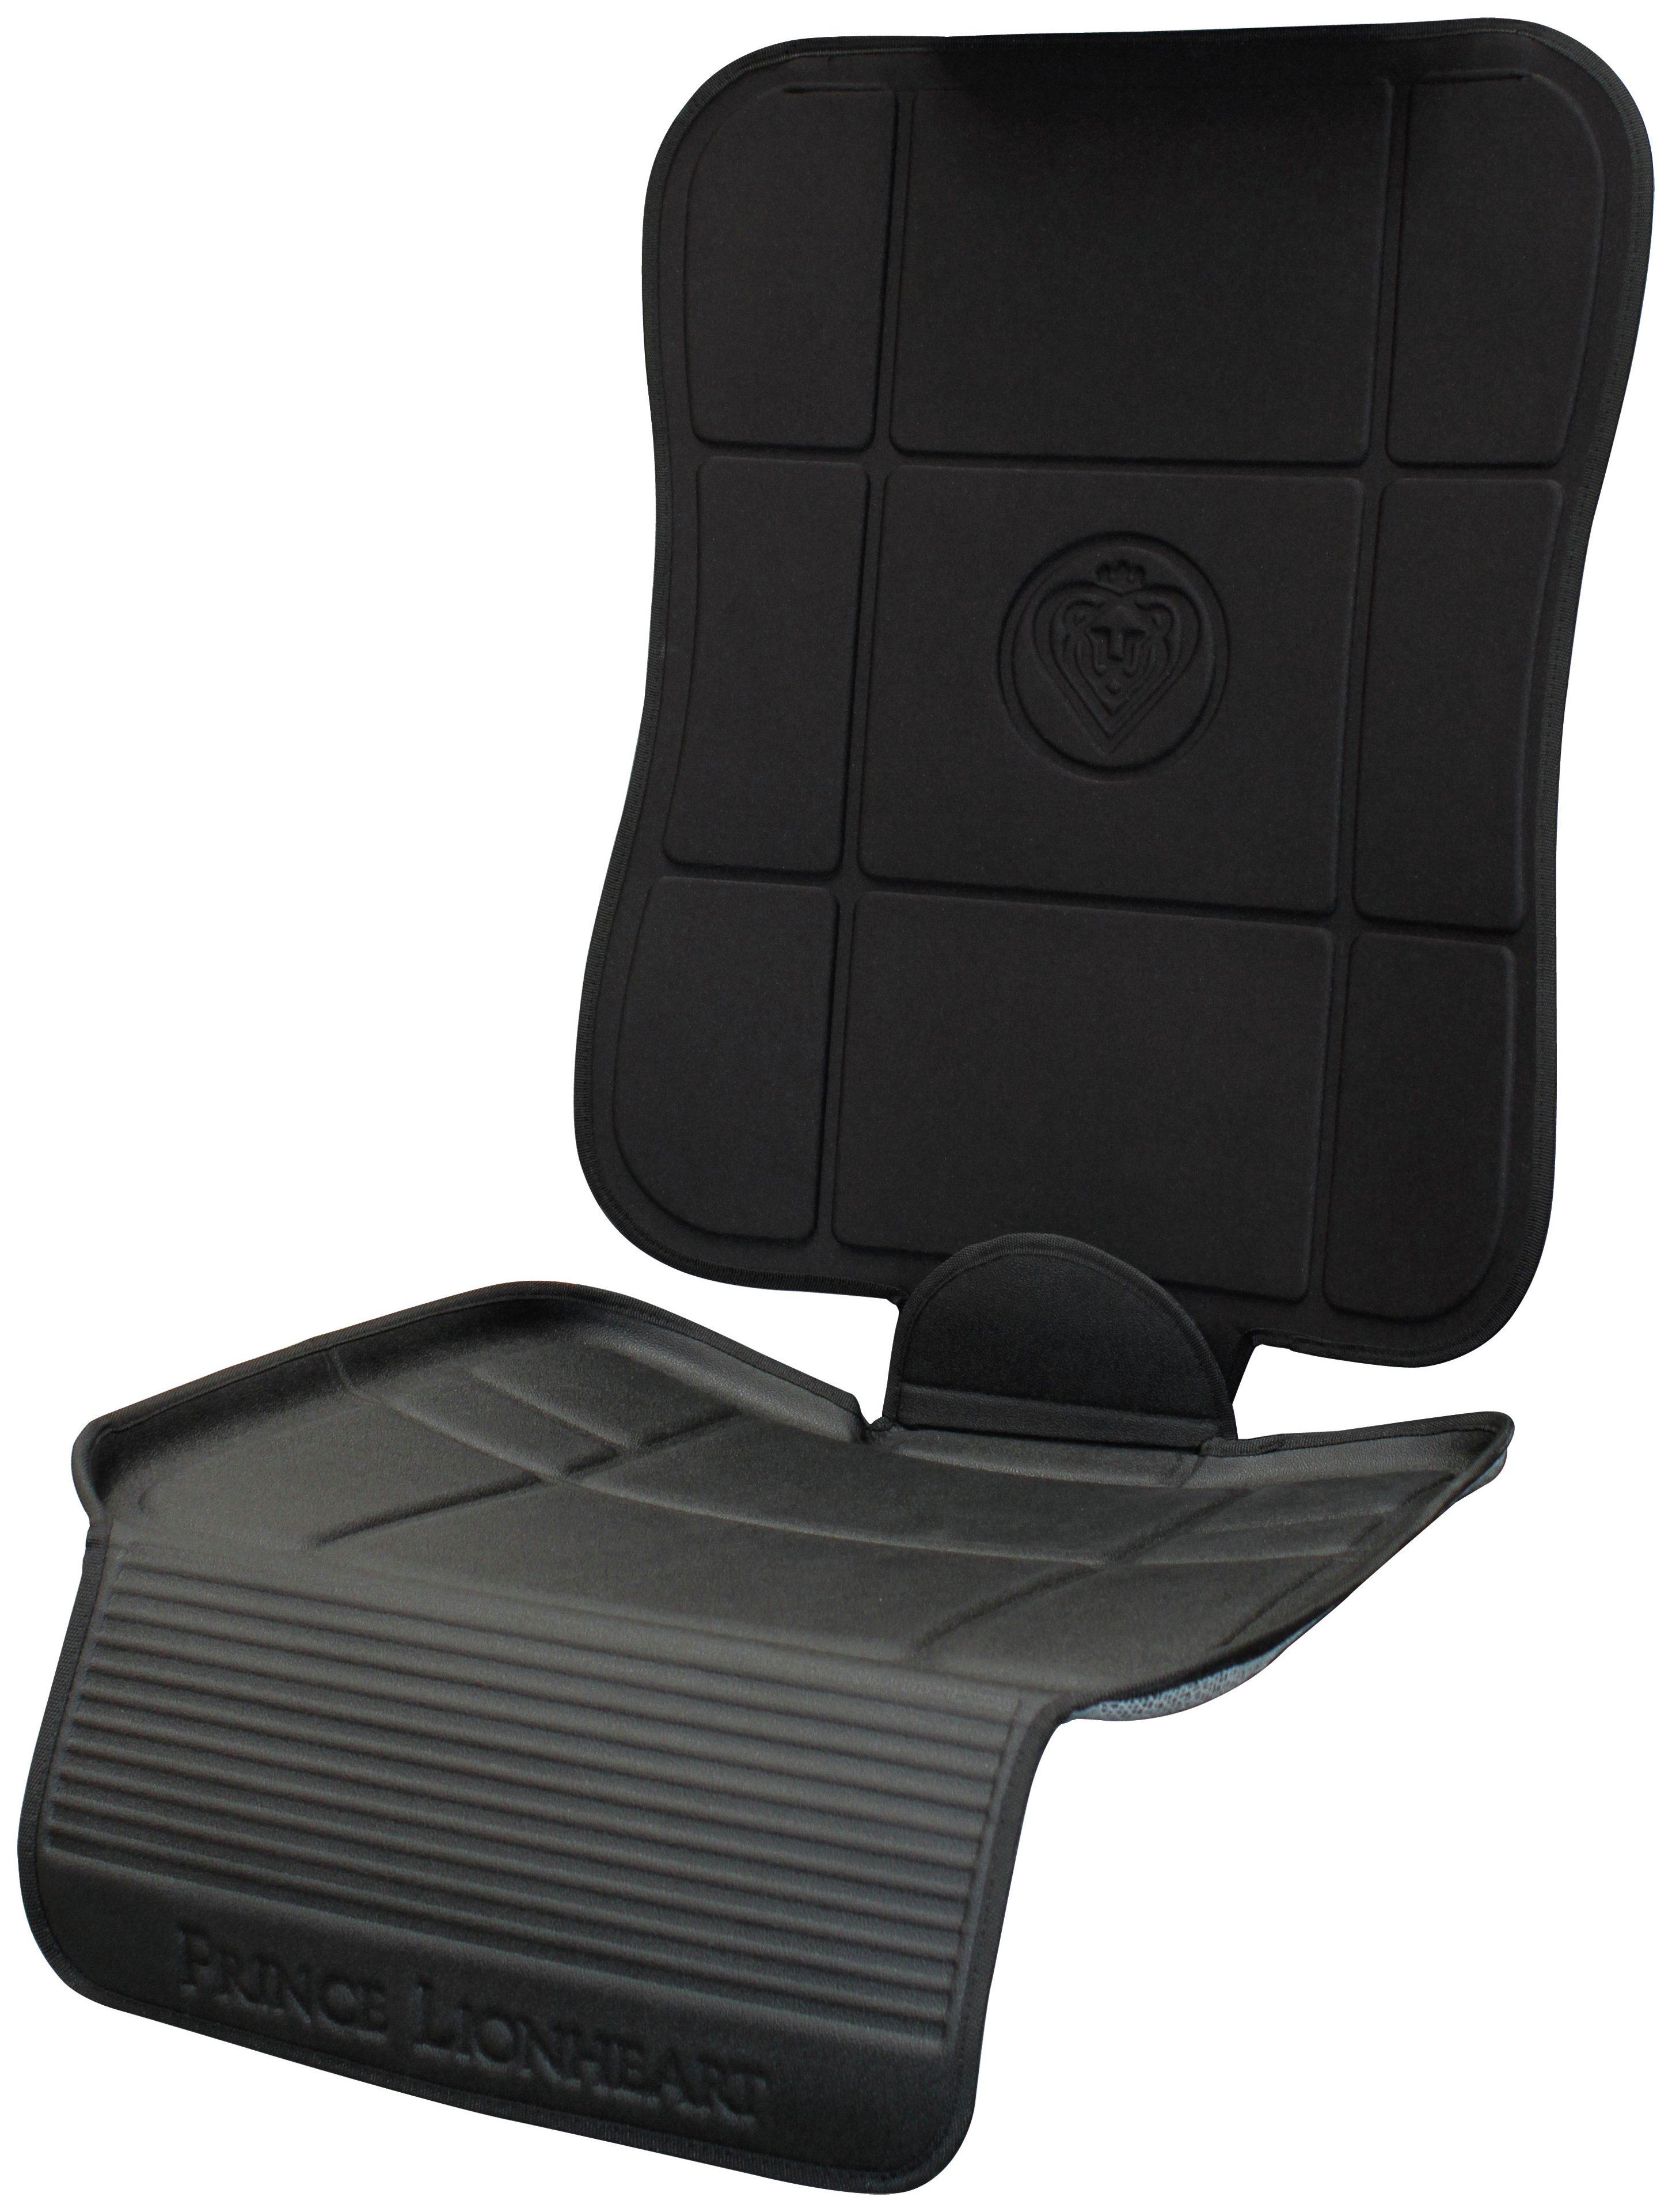 Prince Lionheart 2 Stage Seat Saver - Black and Grey